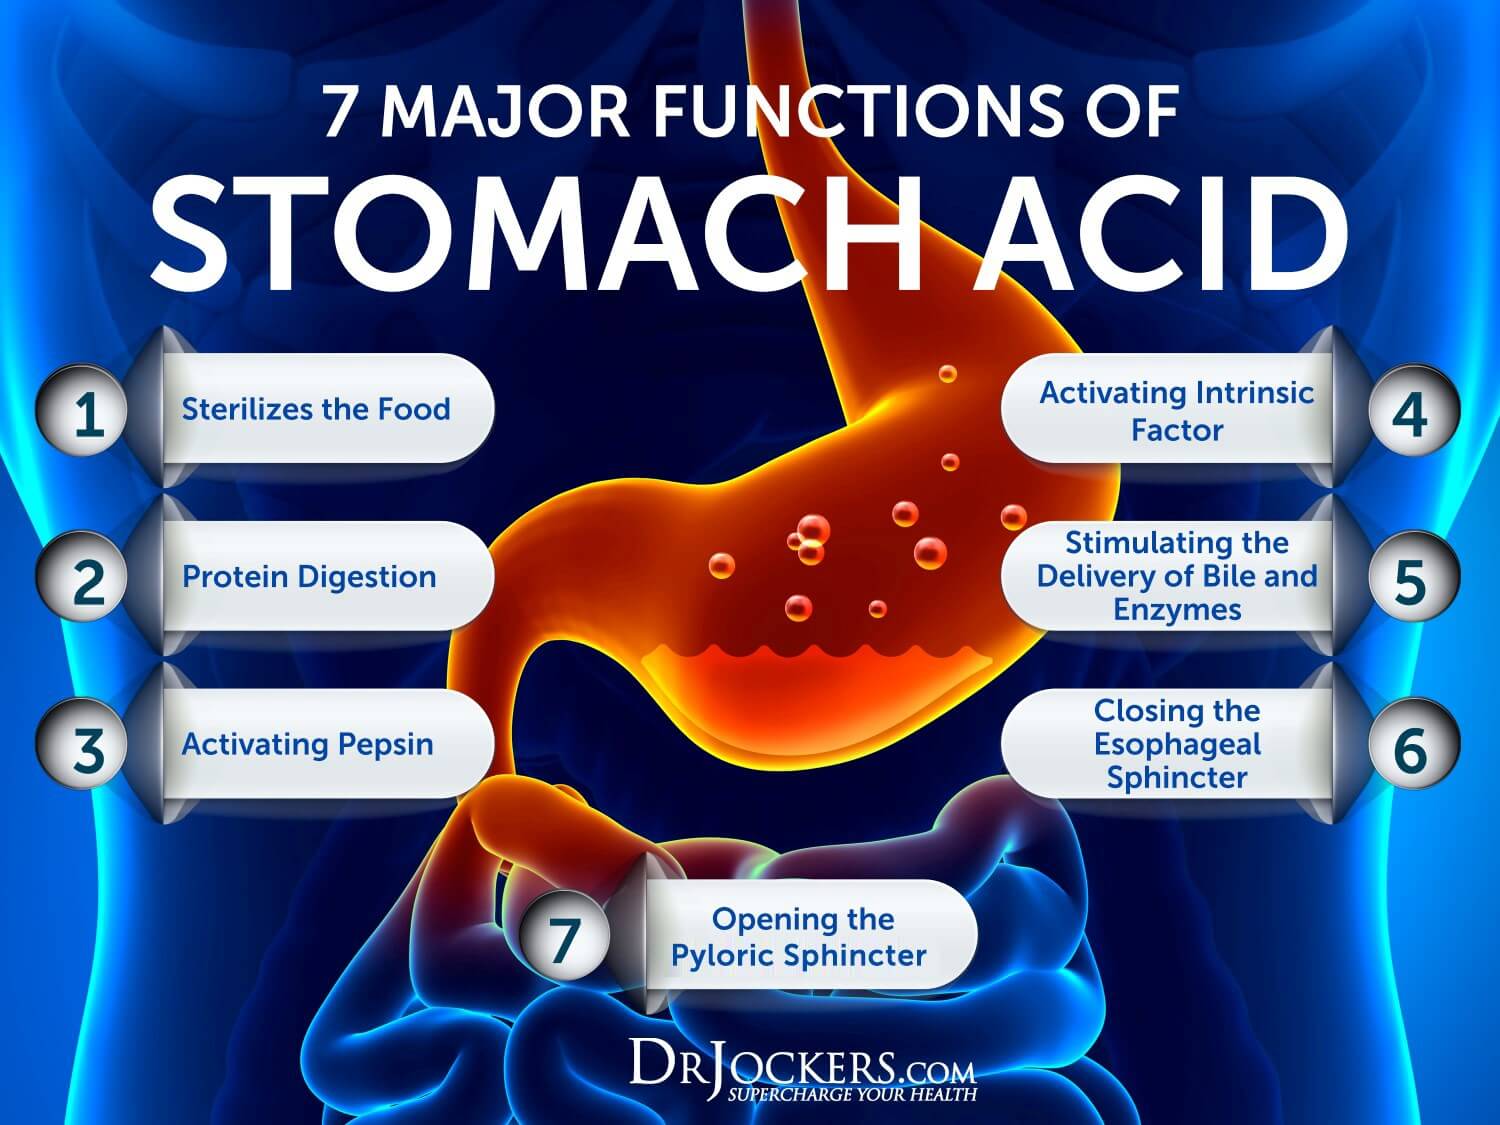 low stomach acid, Causes and Symptoms of Low Stomach Acid